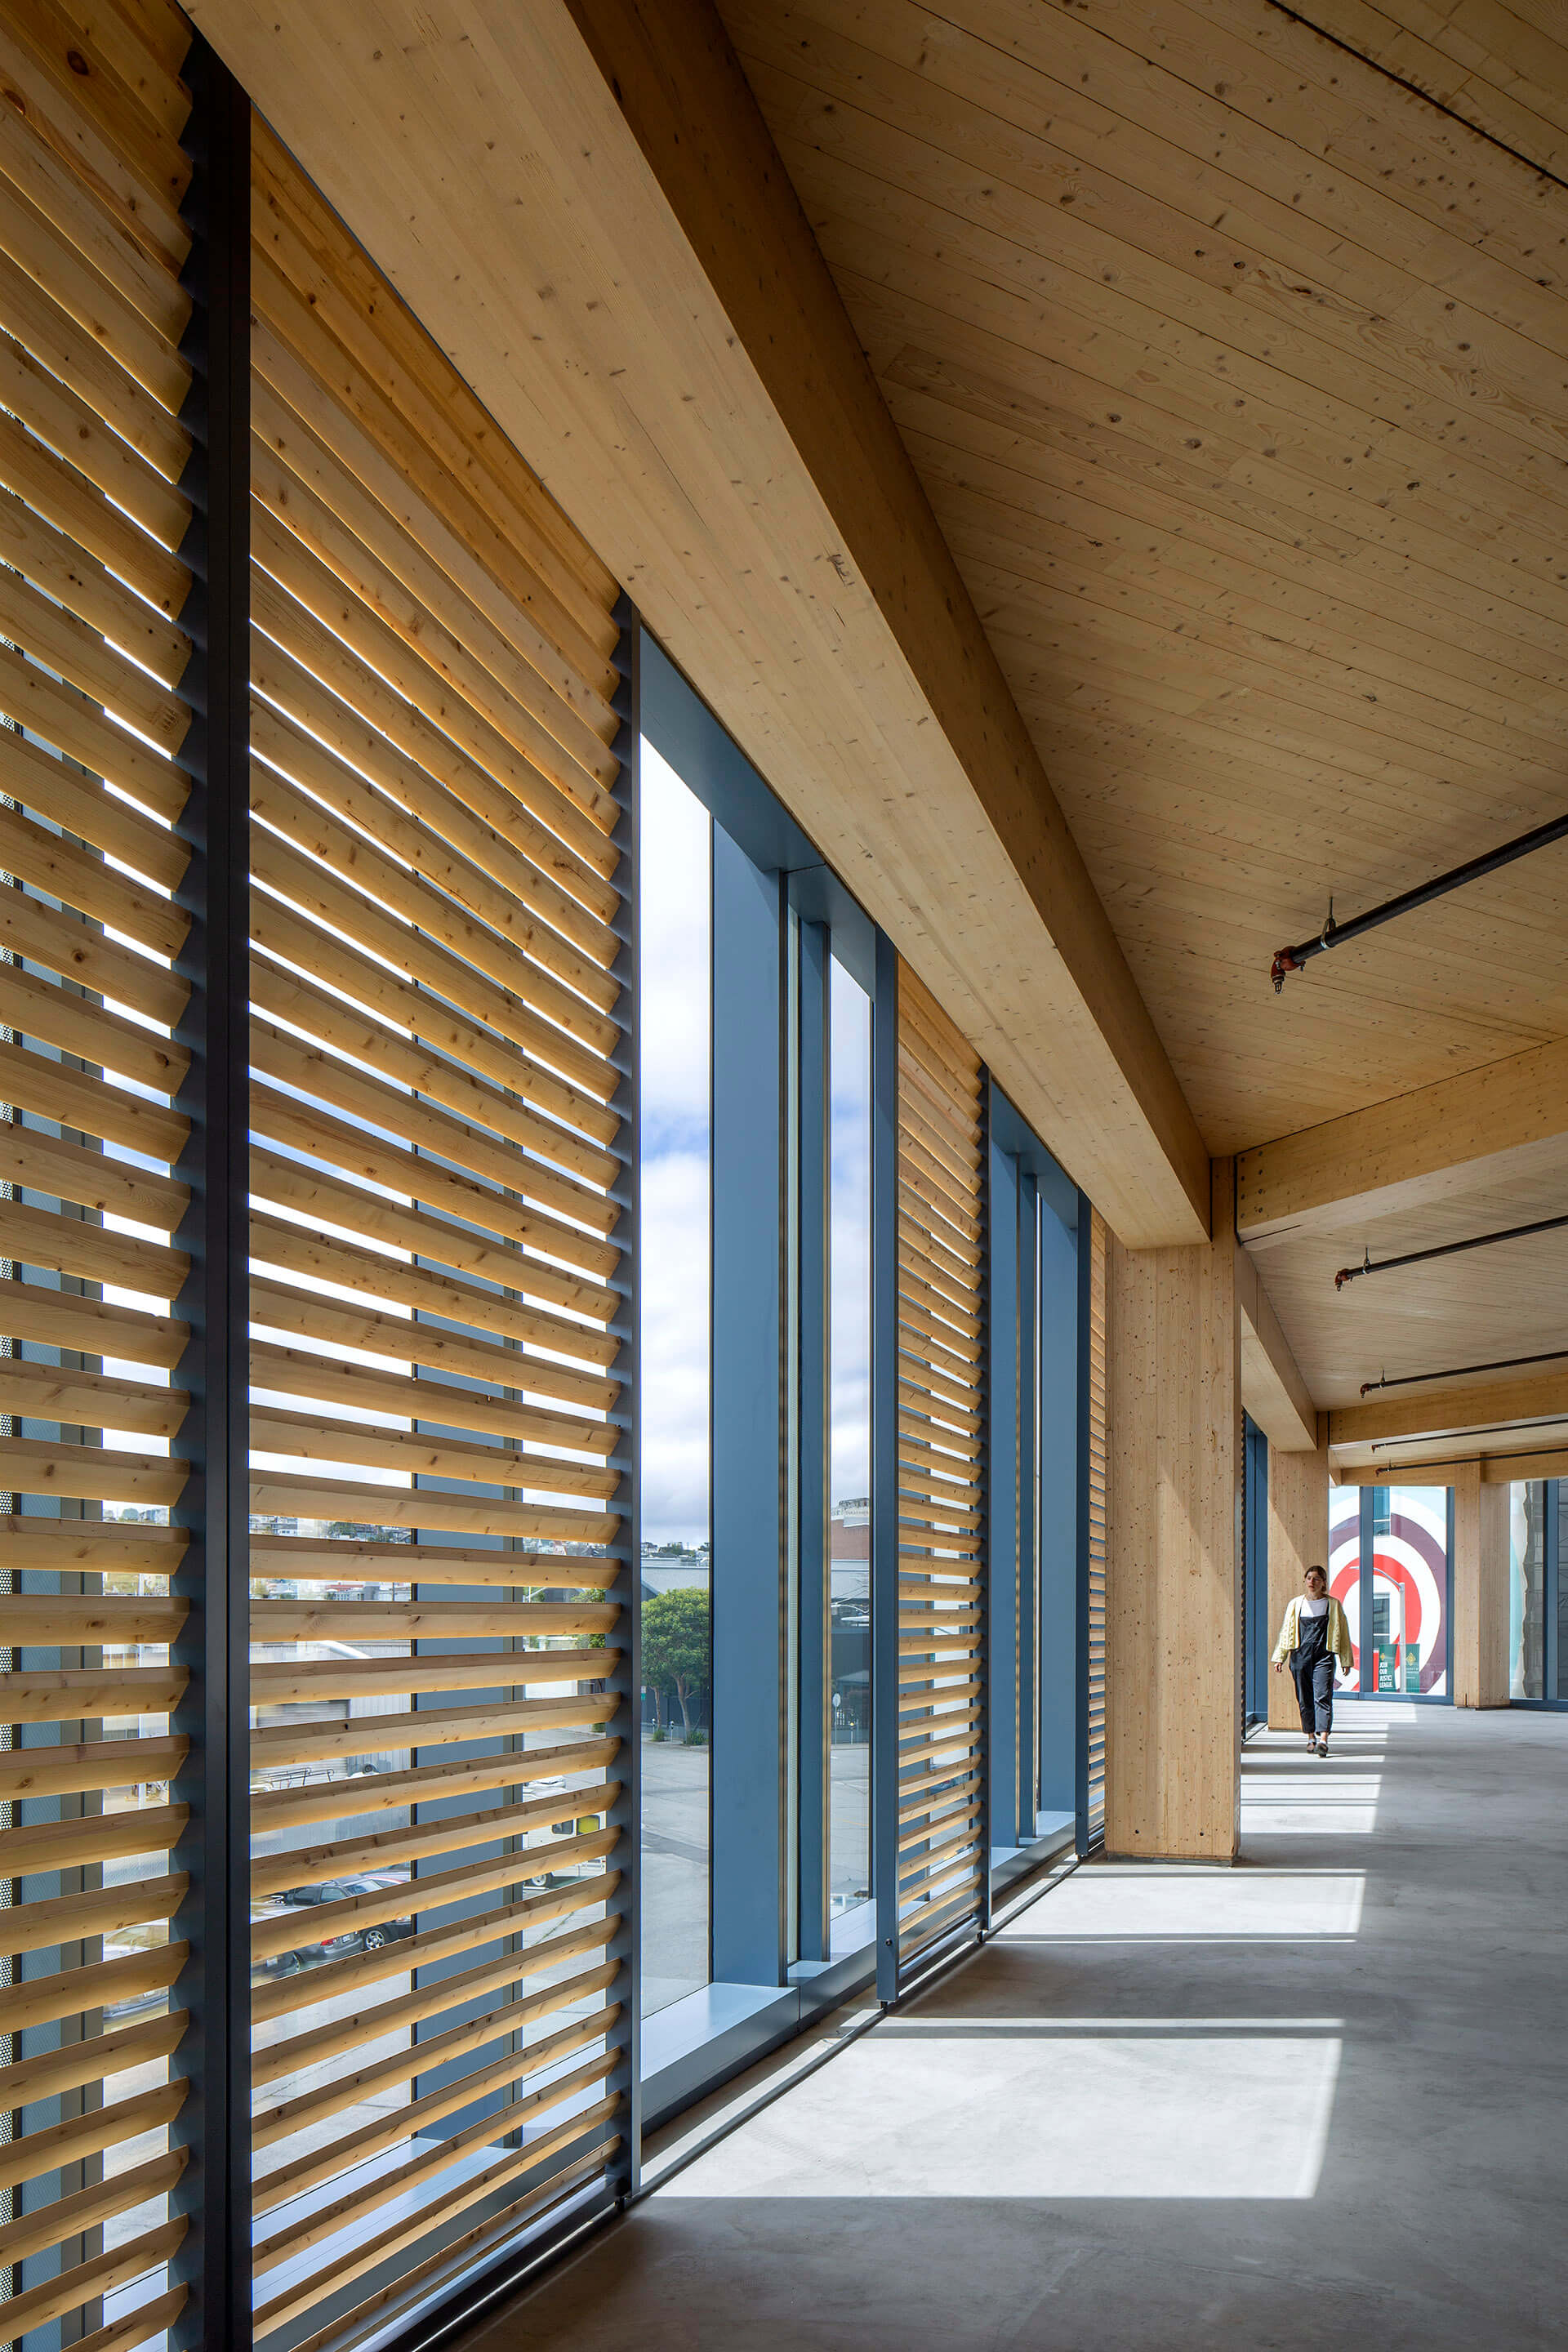 interior of a mass timber building with sunshades